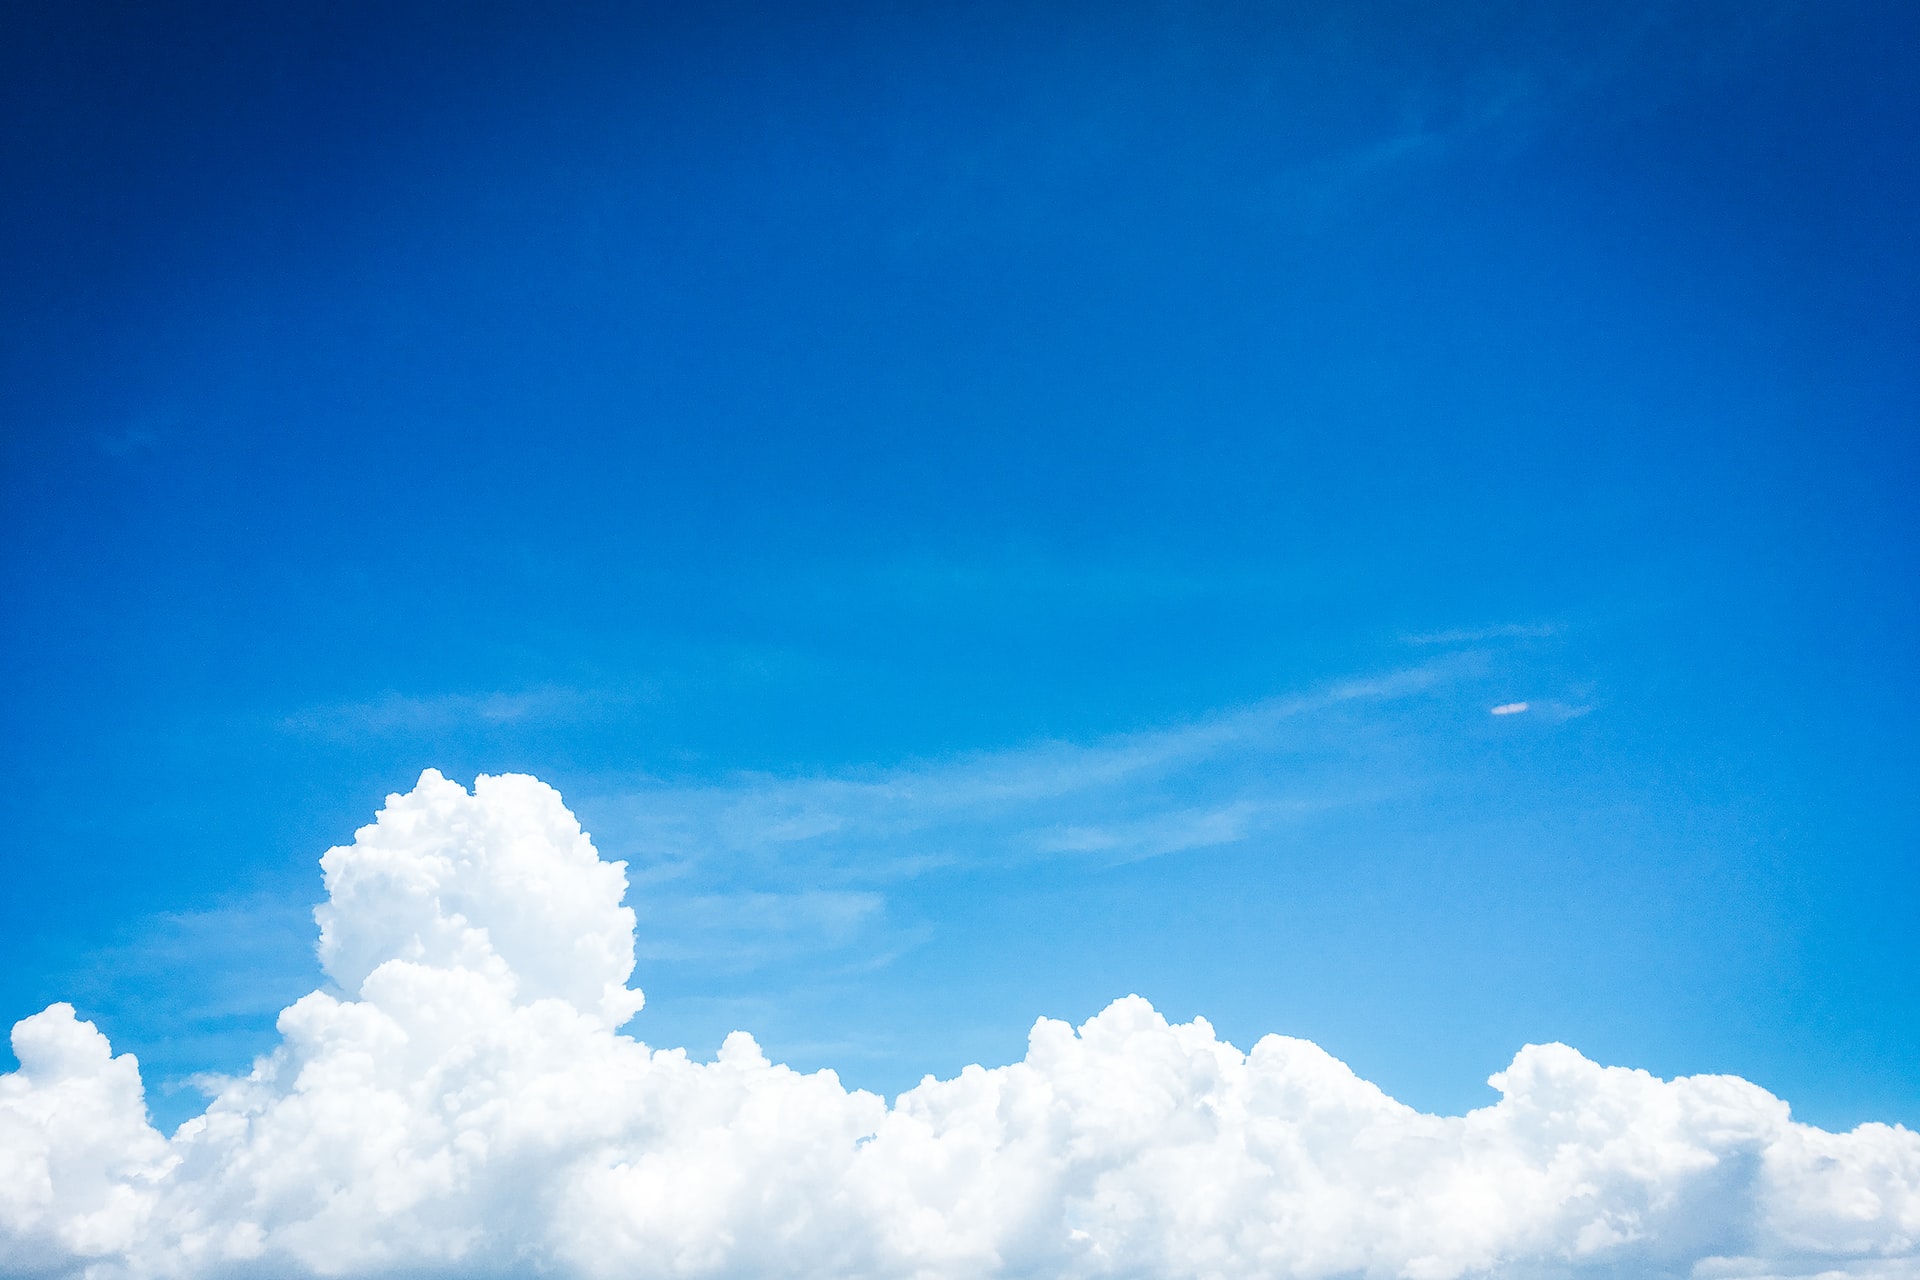 A blue sky with white fluffy clouds